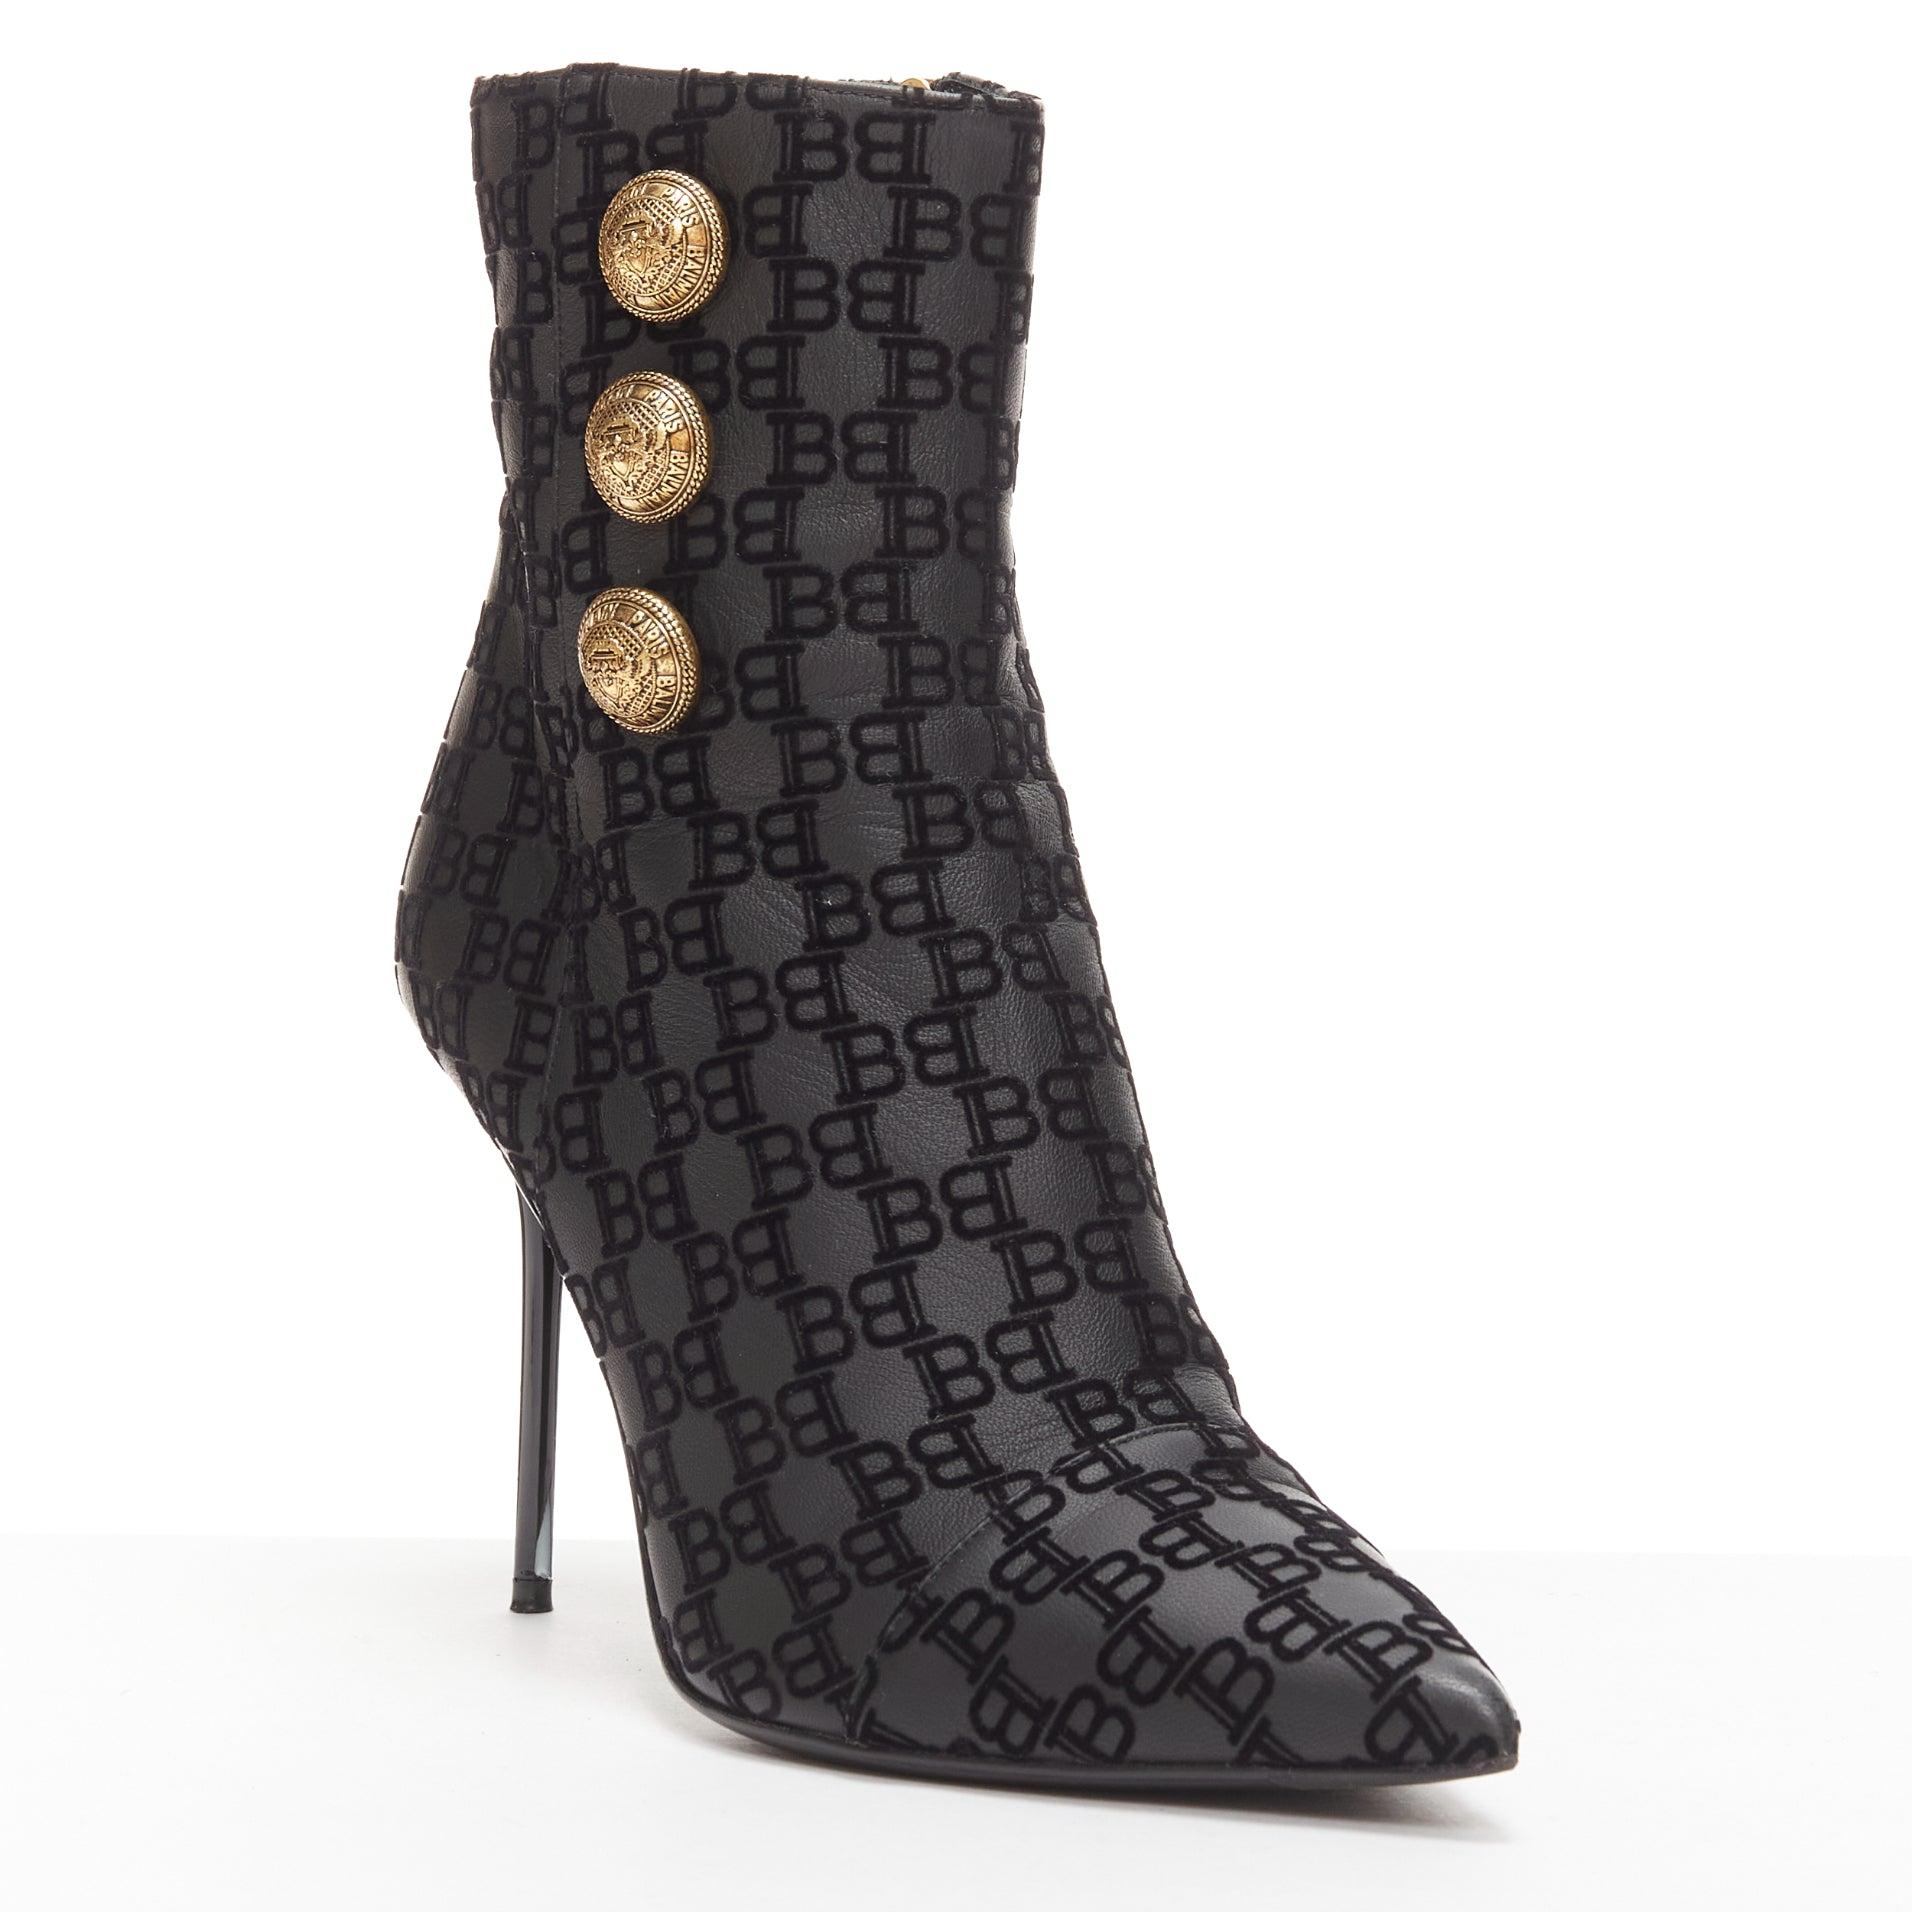 BALMAIN black BB monogram gold buttons high top stiletto boots EU38
Reference: AAWC/A00949
Brand: Balmain
Designer: Olivier Rousteing
Material: Leather
Color: Black, Gold
Pattern: Monogram
Closure: Zip
Lining: Black Leather
Extra Details: Balmain